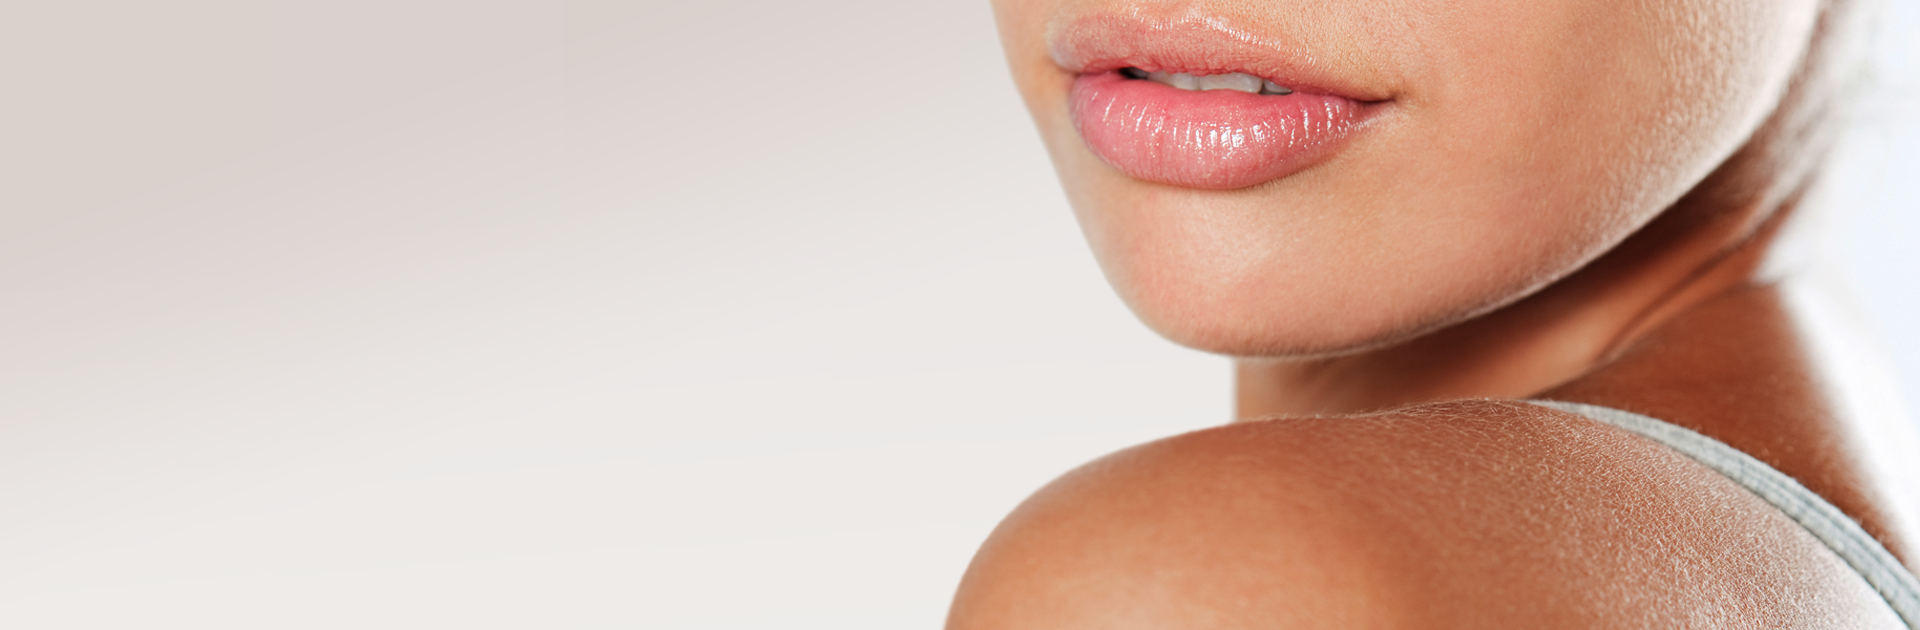 Enlargement or reduction of the lips using modern surgery